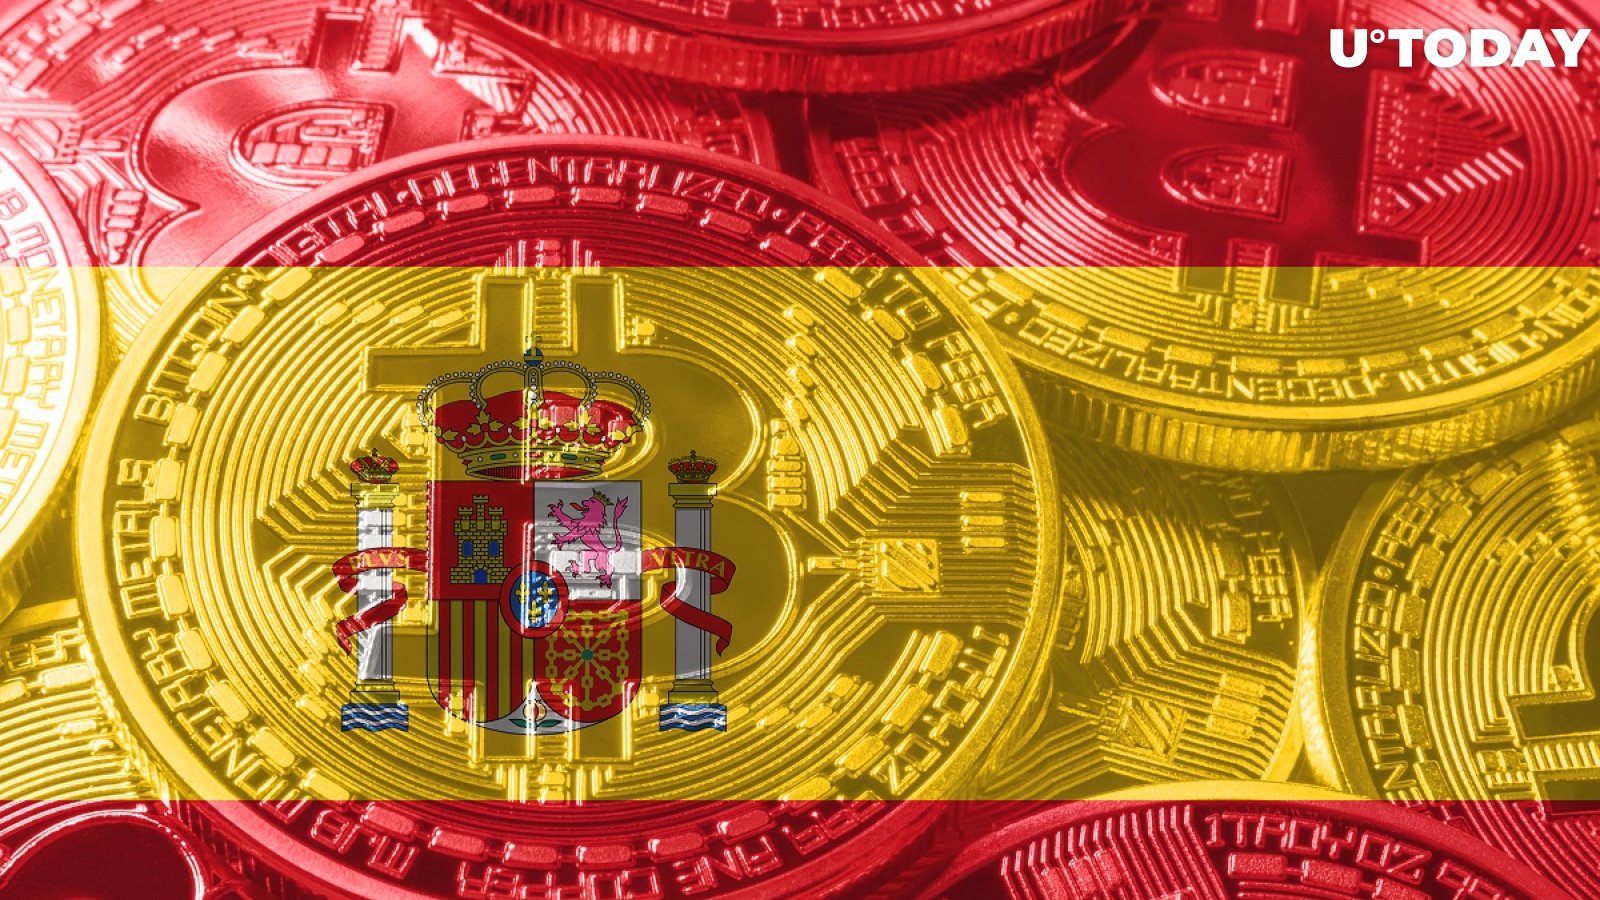 Spanish Lawmaker Proposes Turning Spain Into Bitcoin Mining Hub